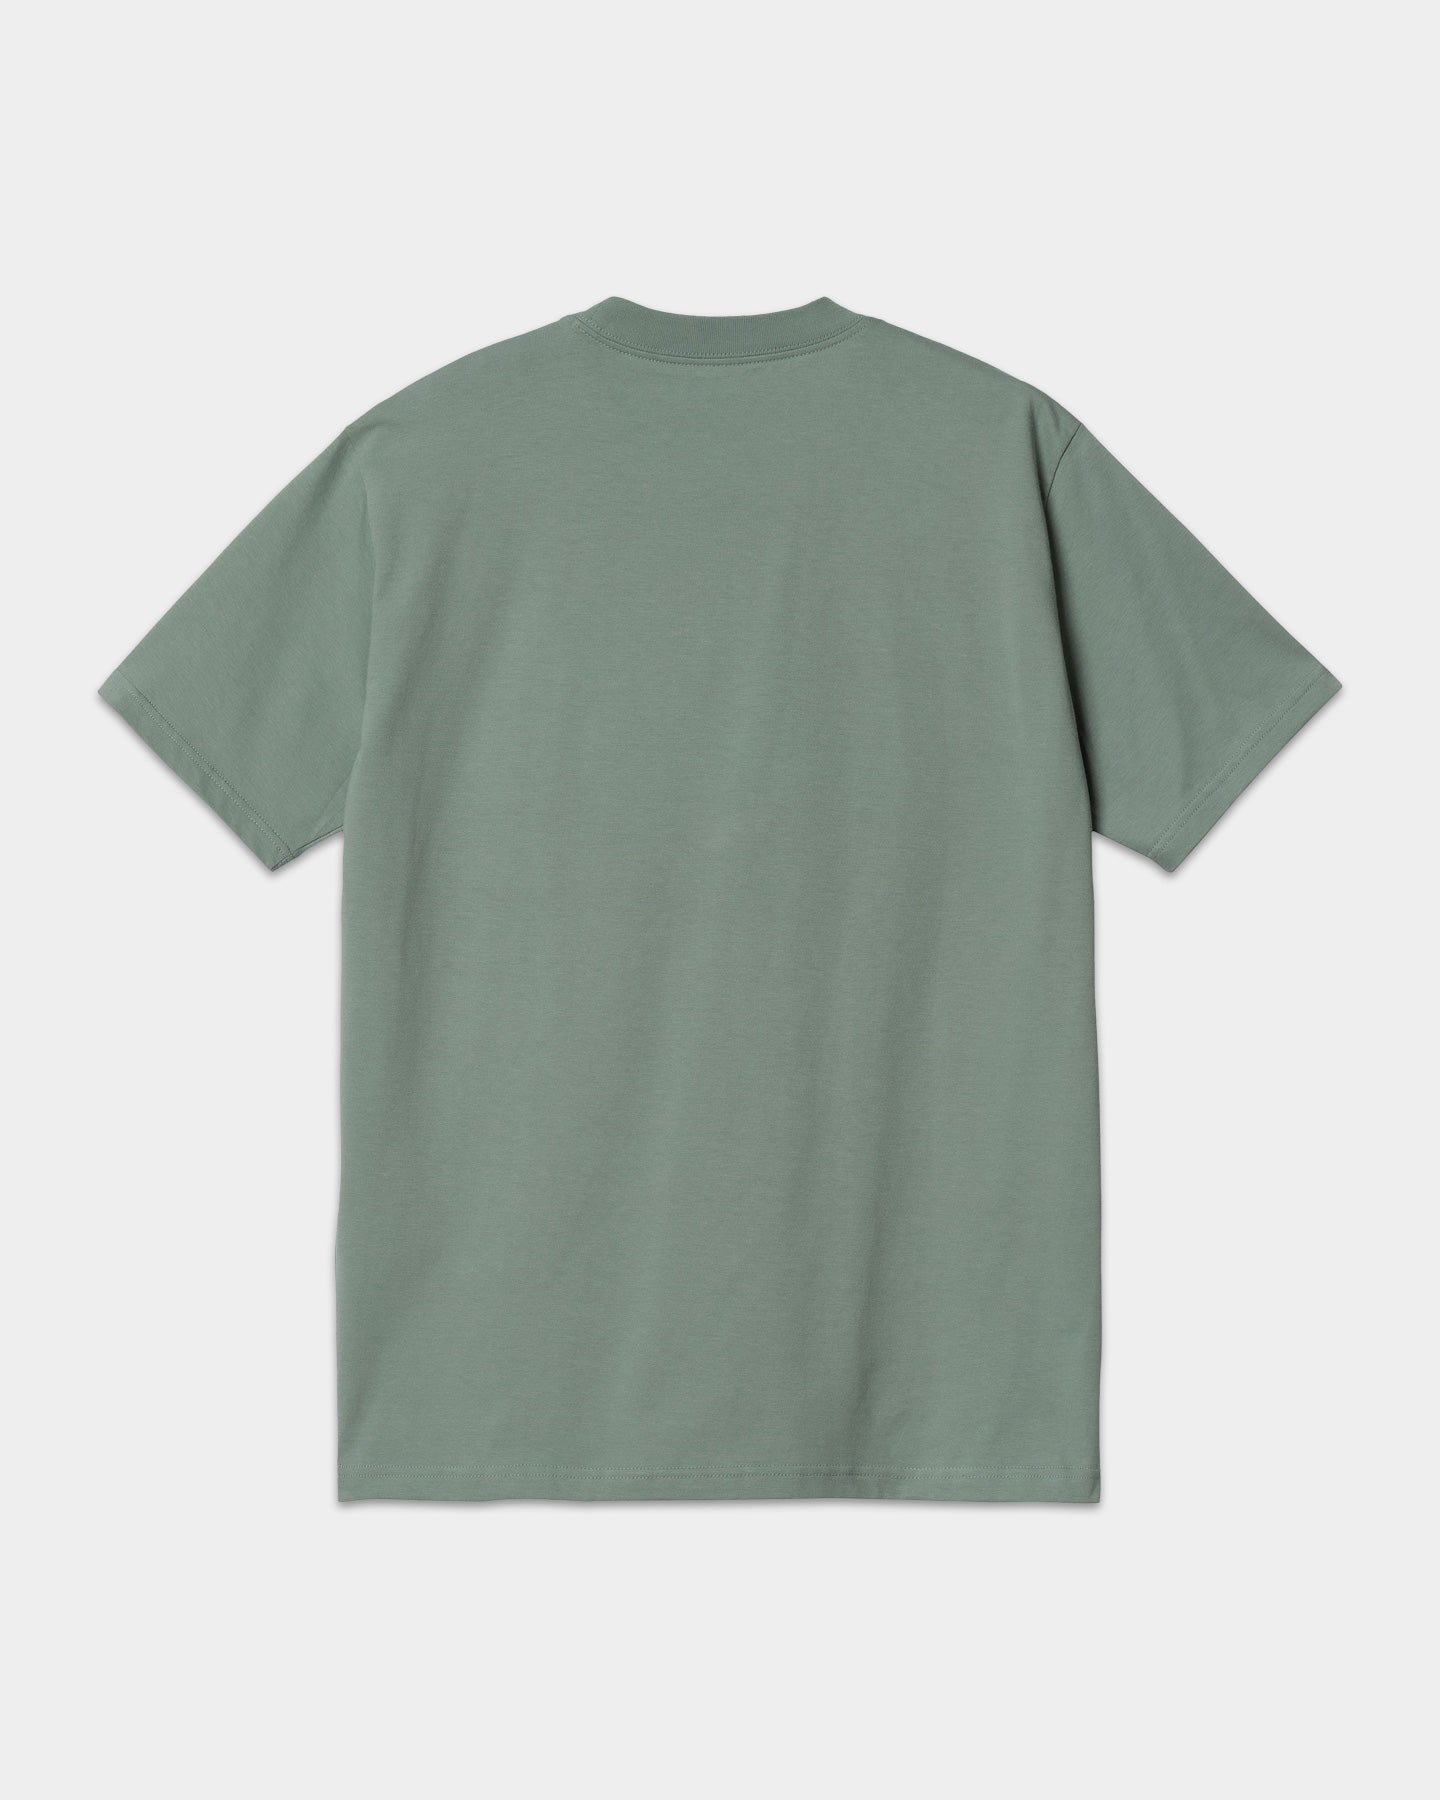 S/S MYSTERY MACHINE T-SHIRT - glassy teal